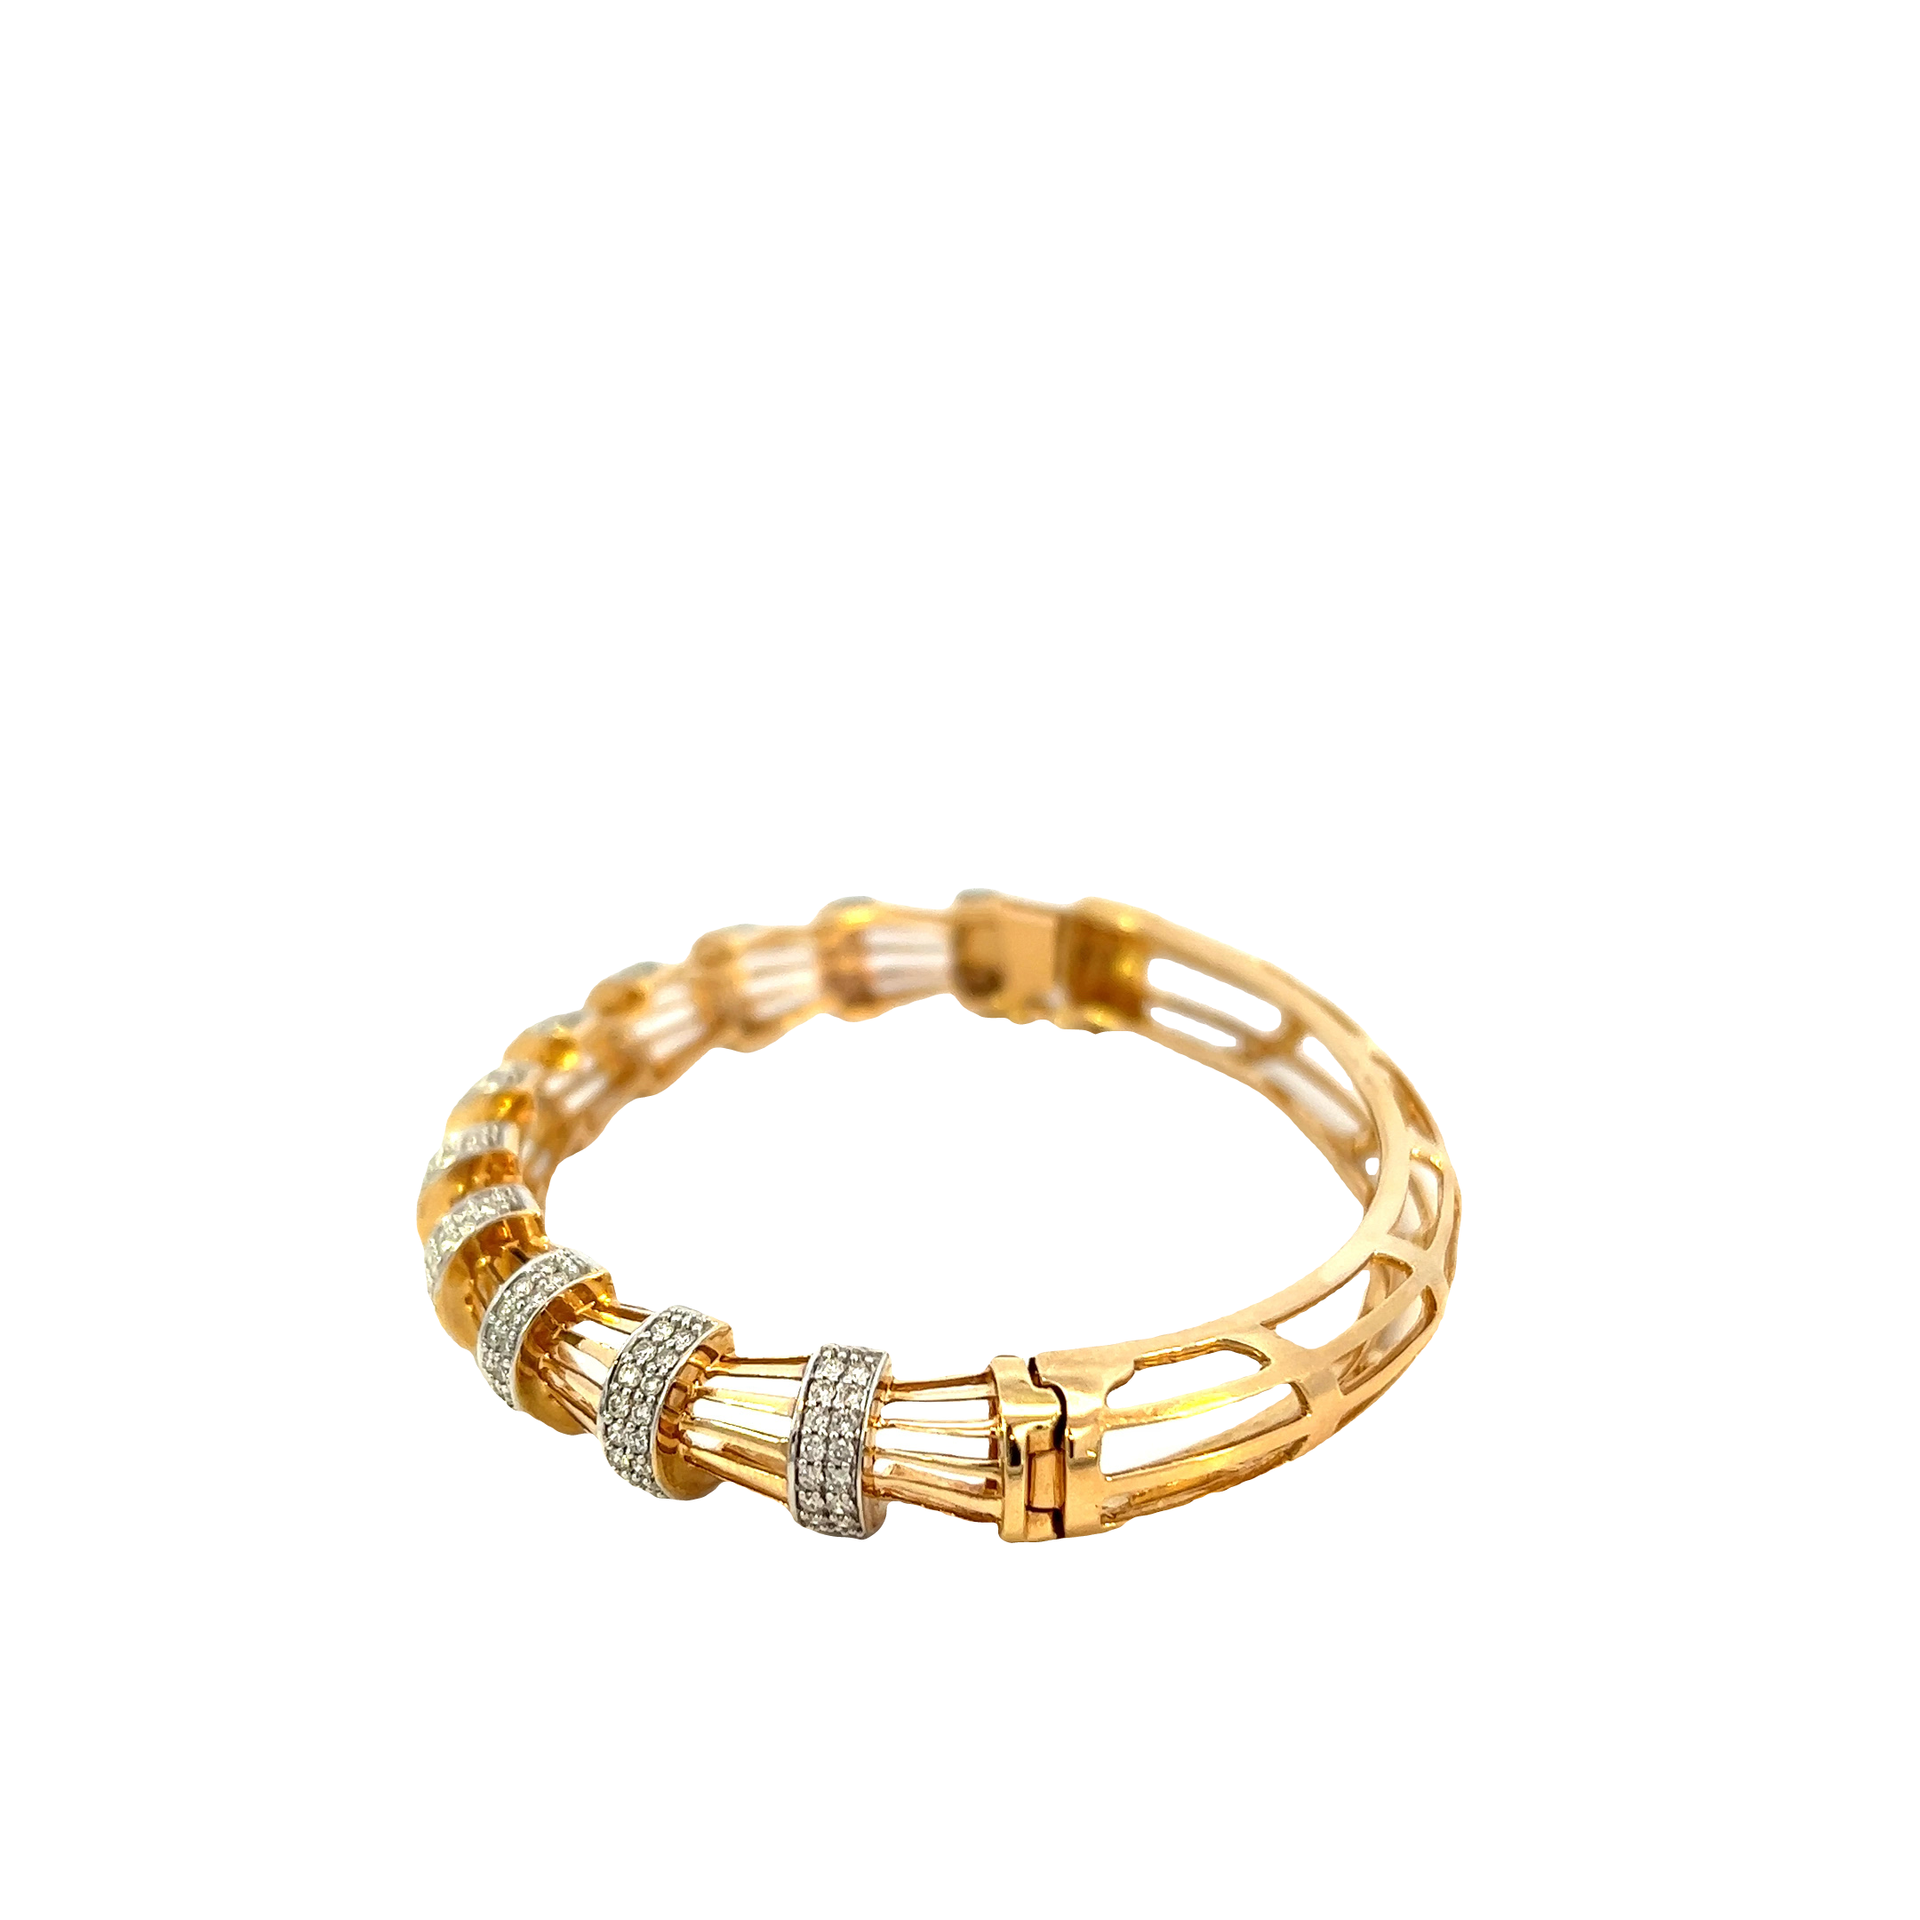 14KT Yellow Gold With Round Cut Diamonds Fluted Design Bangle